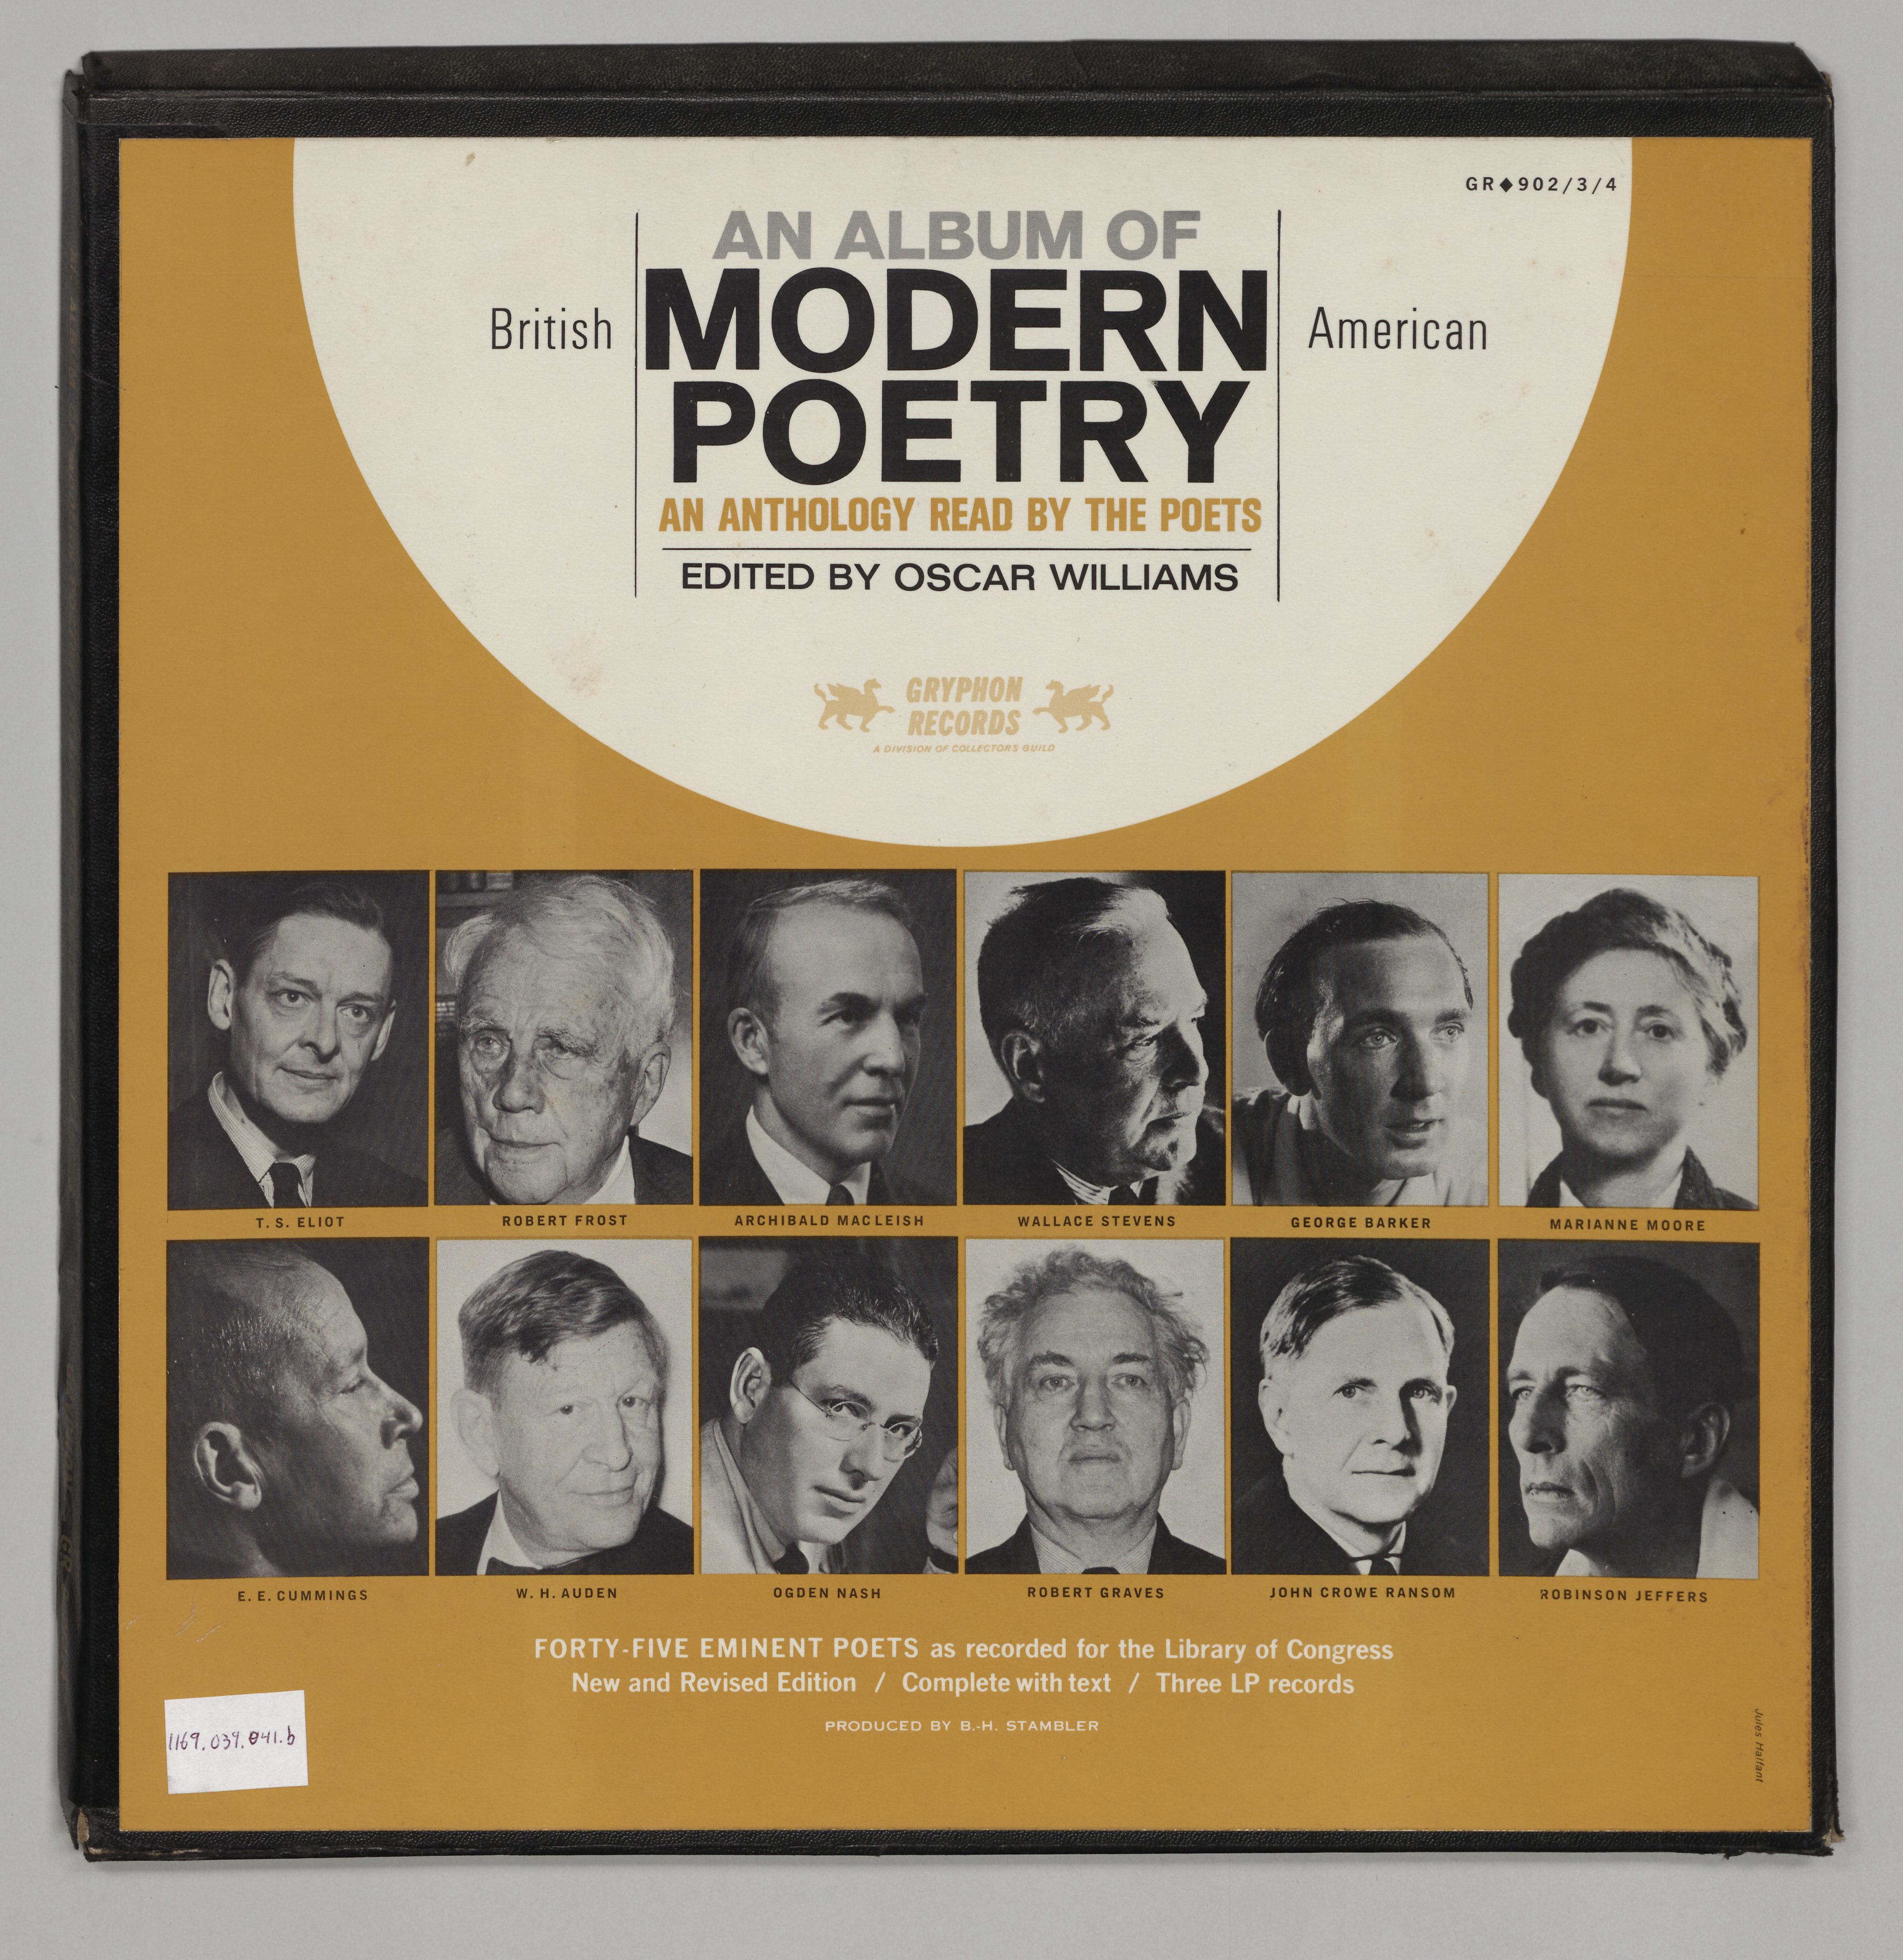 An Album of Modern Poetry: An Anthology Read by the Poets